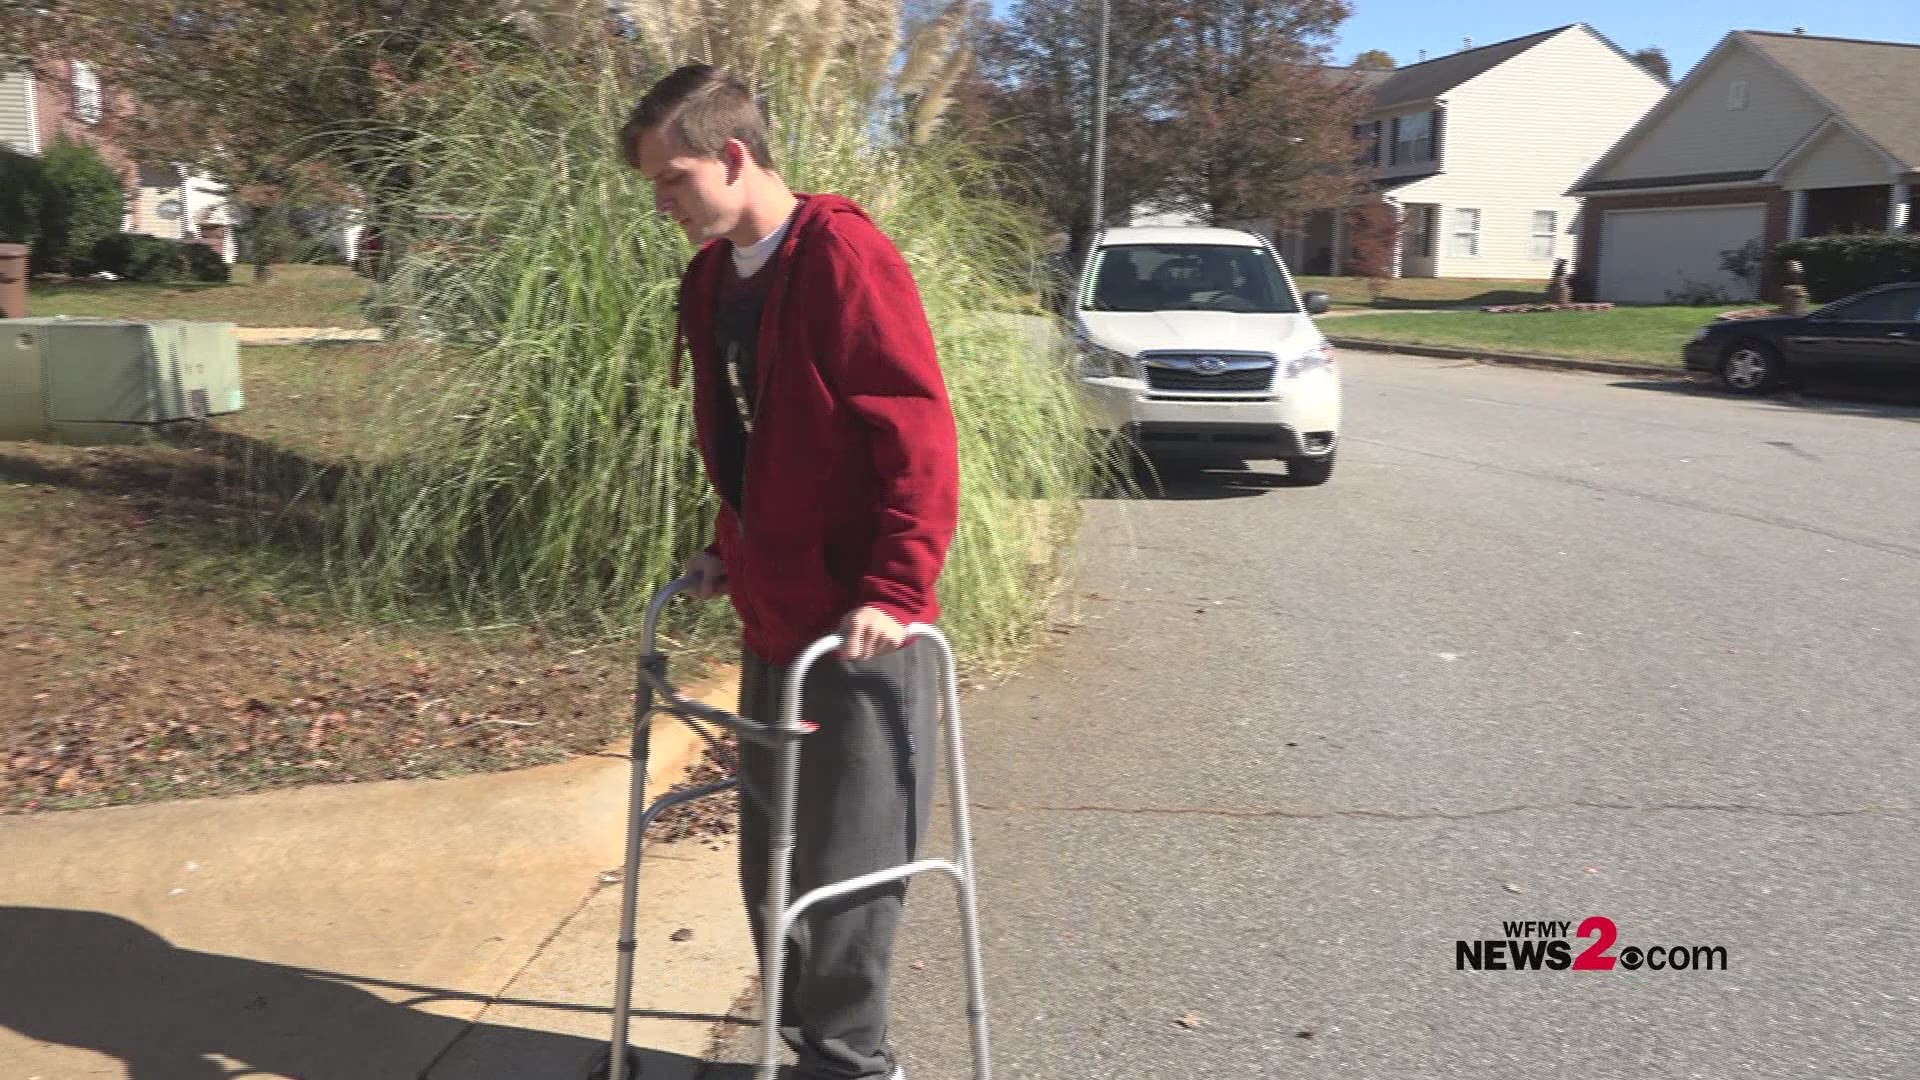 27-year-old Michael White now moves around with the help of a walker and a brace helps to hold his torso upright after jumping from window to escape house fire.